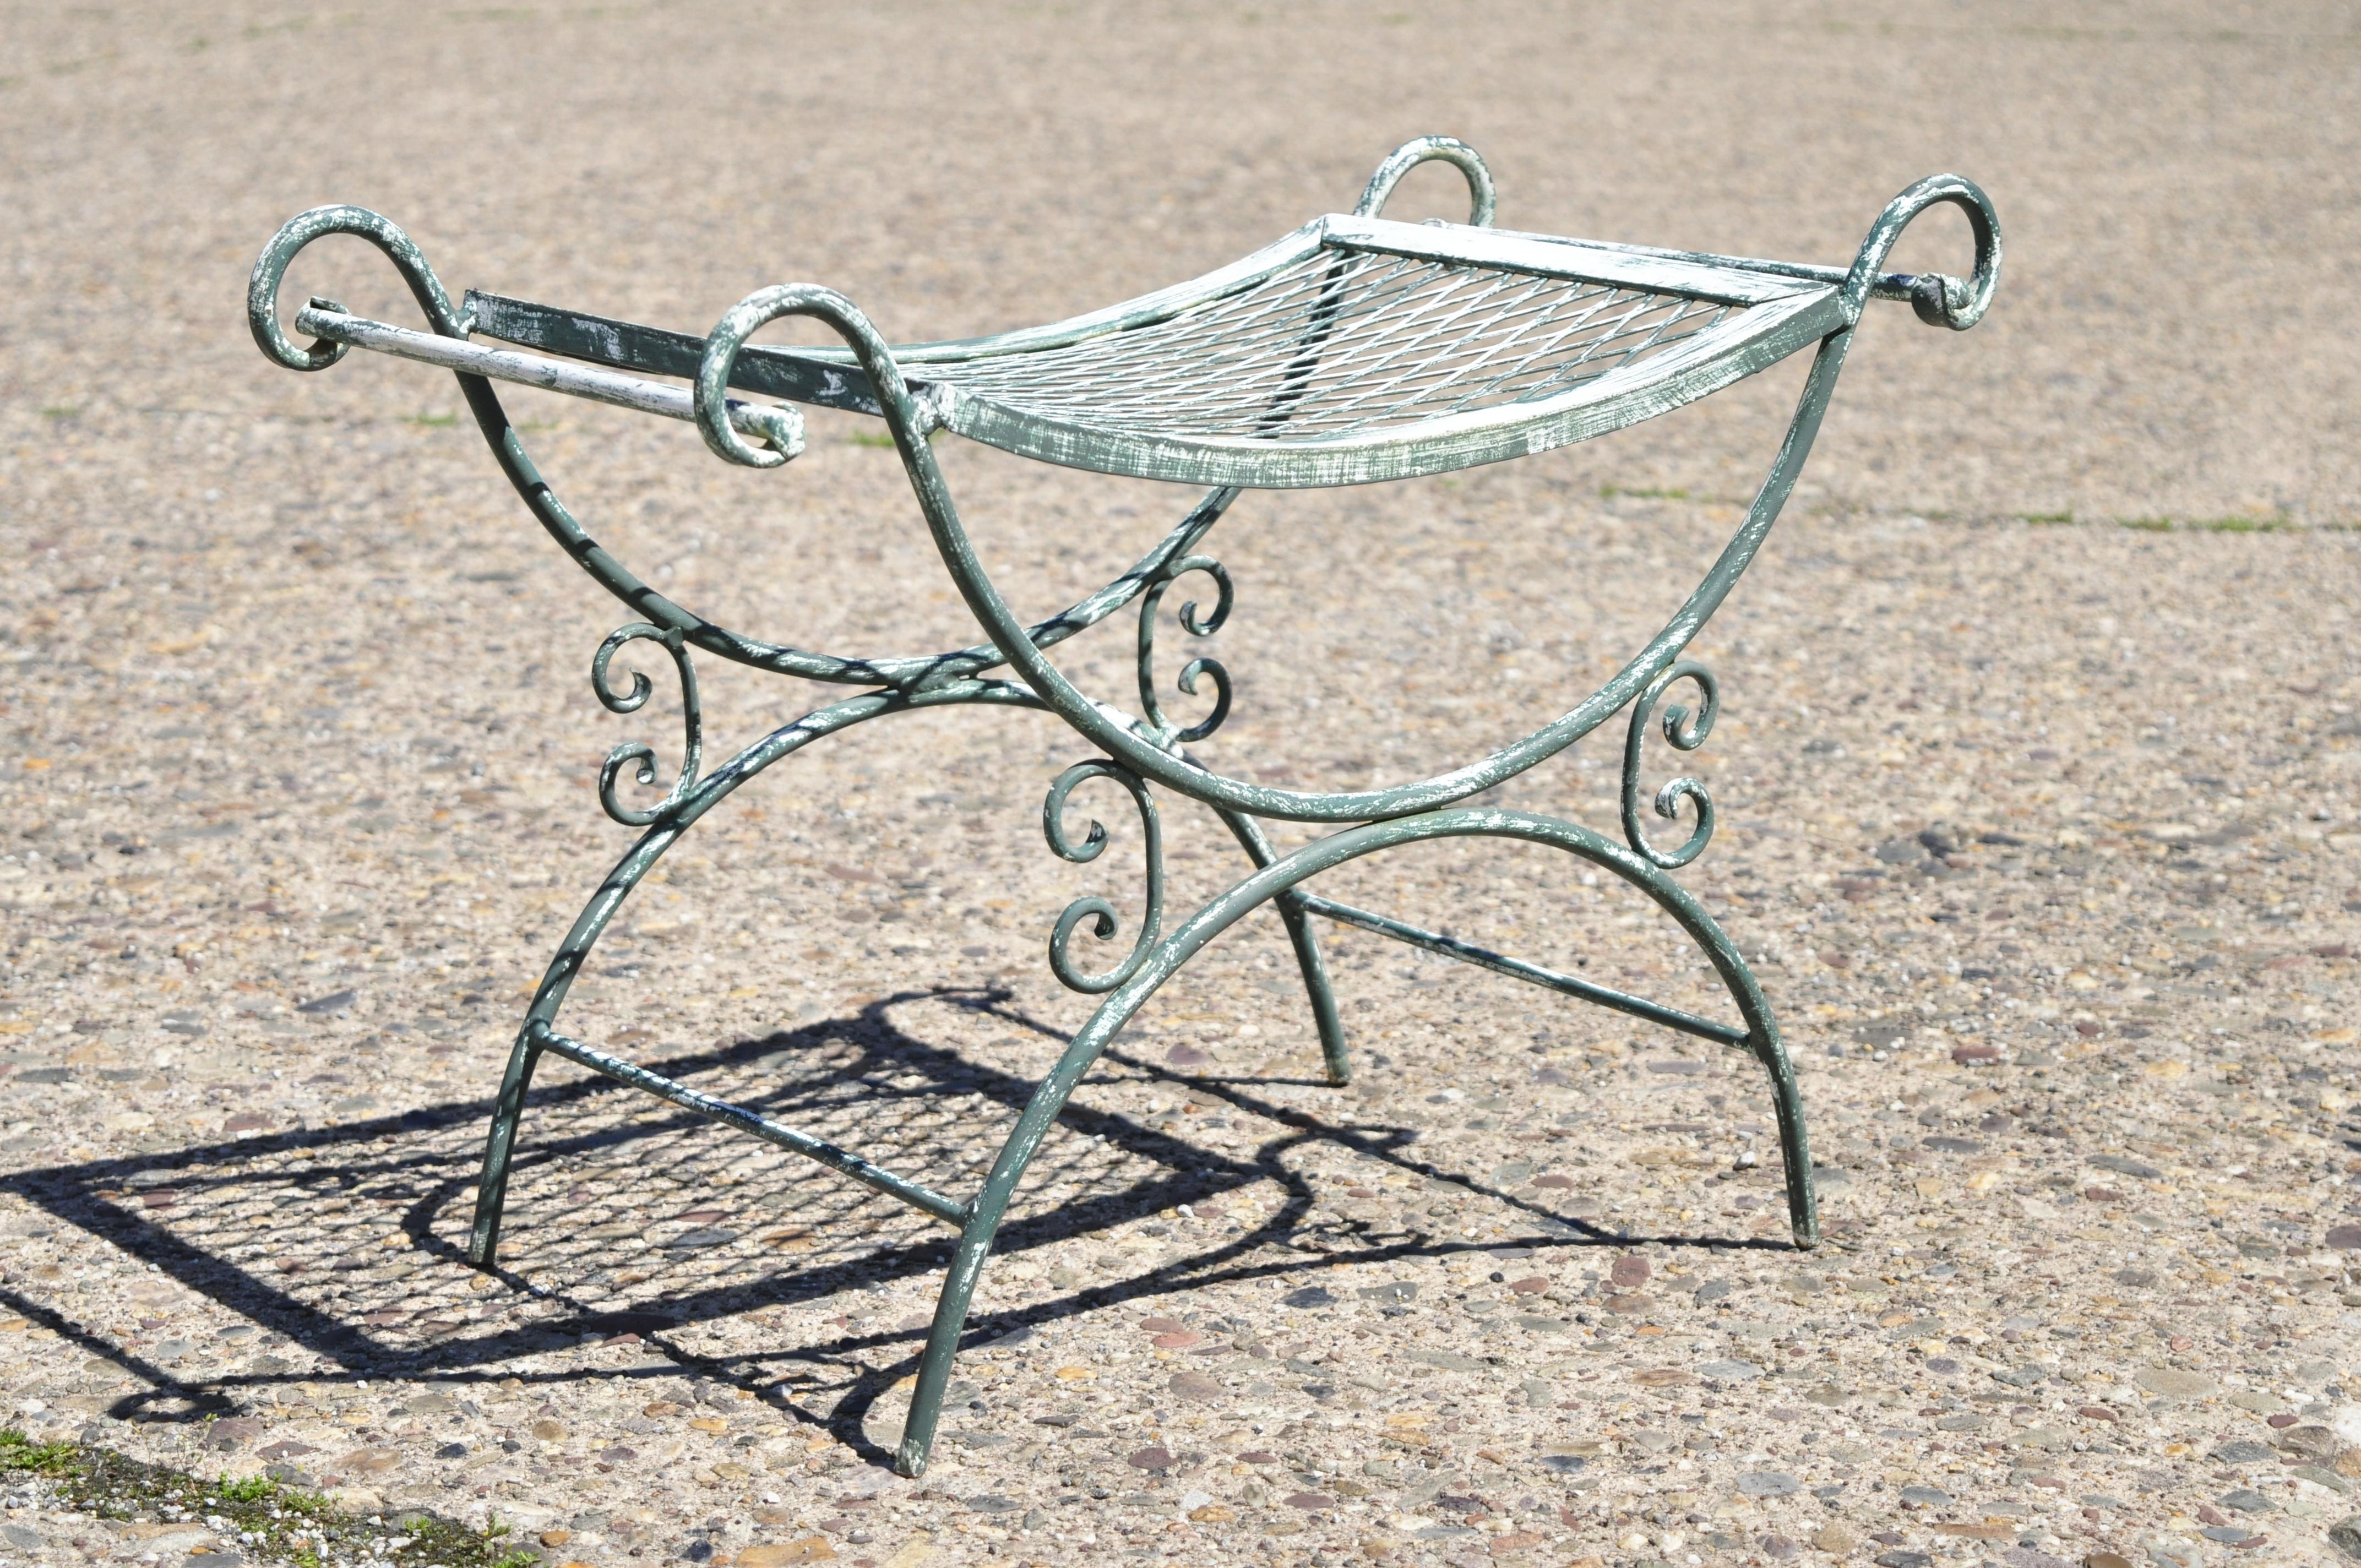 Vintage wrought iron curule mesh bench mid century green white Hollywood Regency. Item features curved mesh seat, X-form curule base, twin handles, wrought iron construction, painted distressed finish, very nice vintage item, quality American